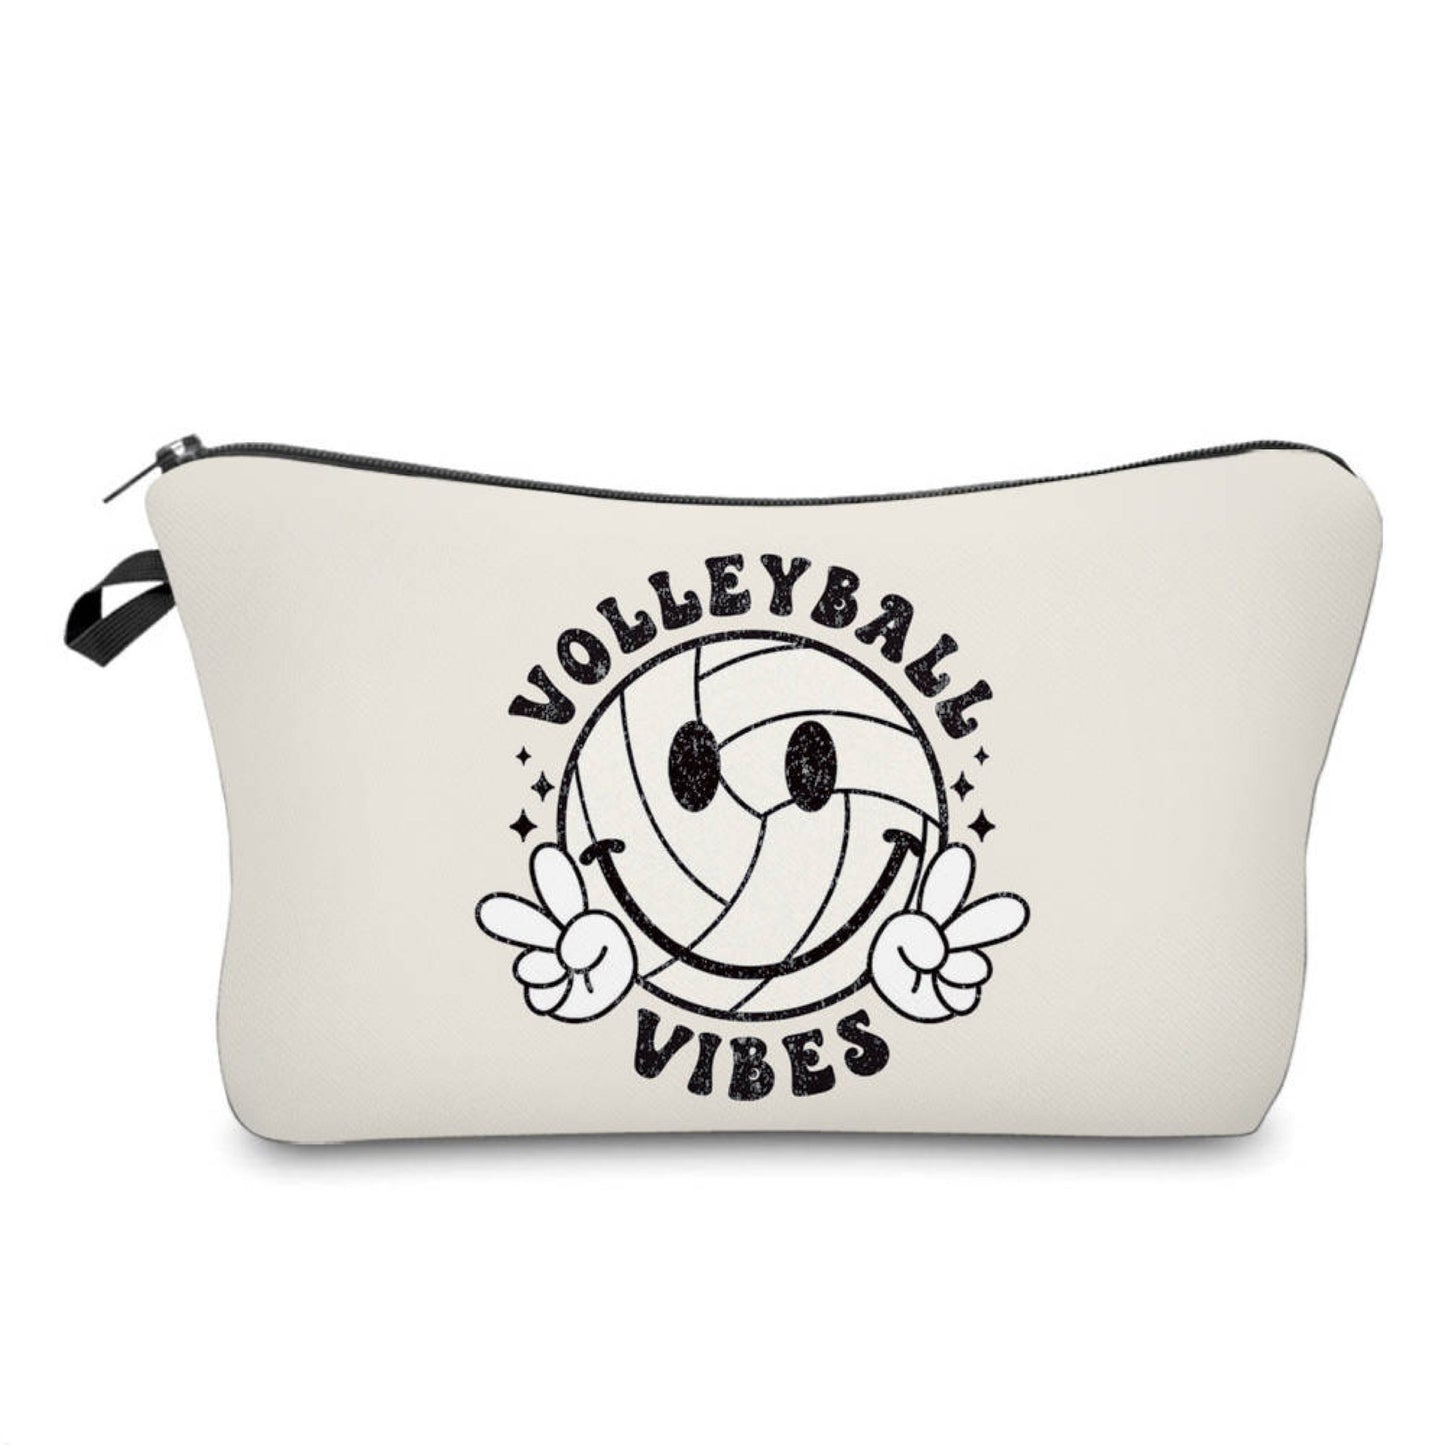 Pouch - Volleyball Vibes Smile